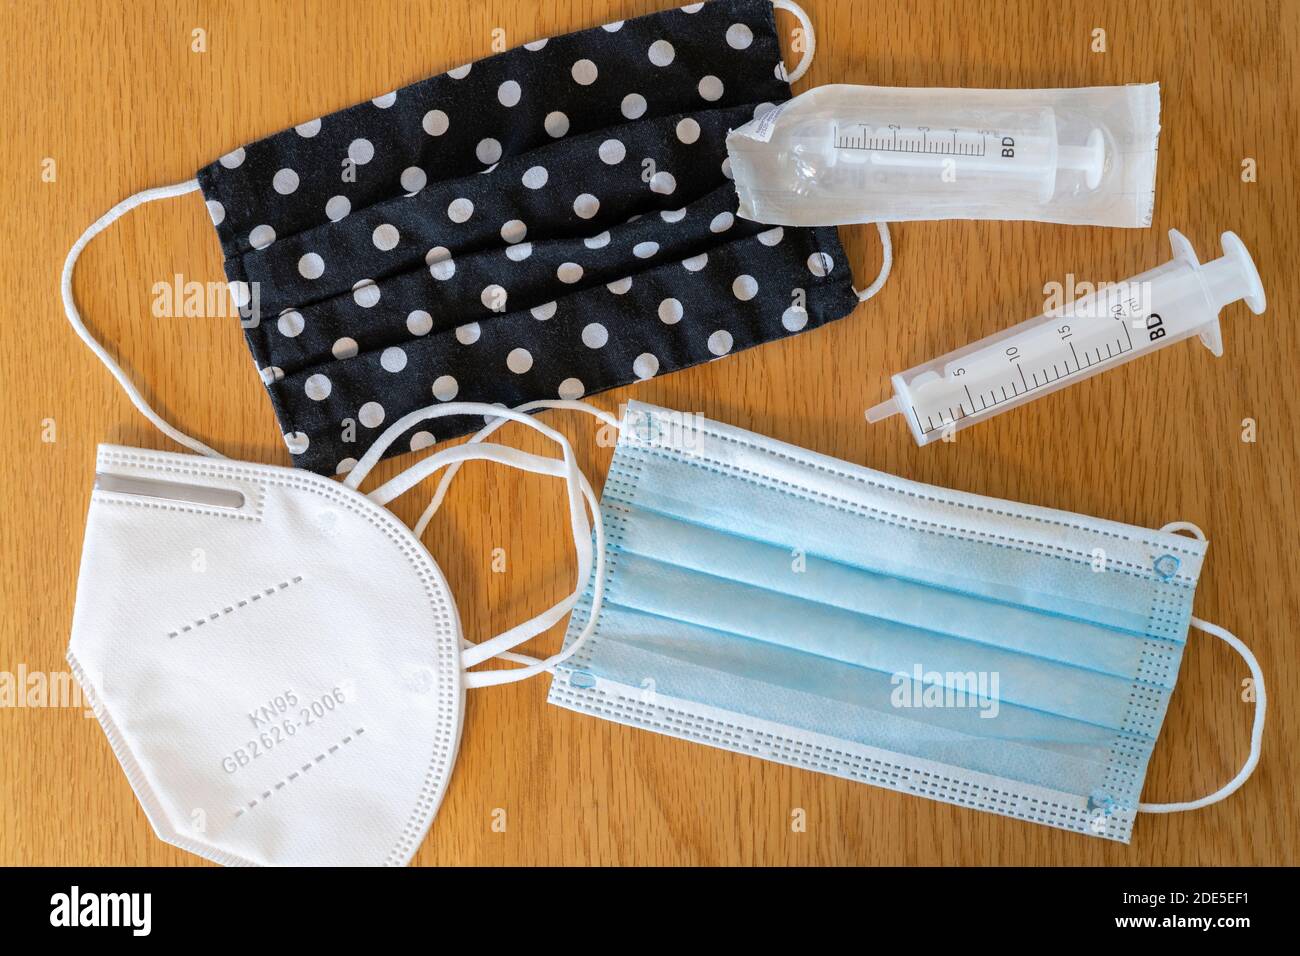 A selection of disposable face masks and a home made spotty mask, with a sealed and opened syringe during the Coronavirus Covid-19 pandemic, UK Stock Photo